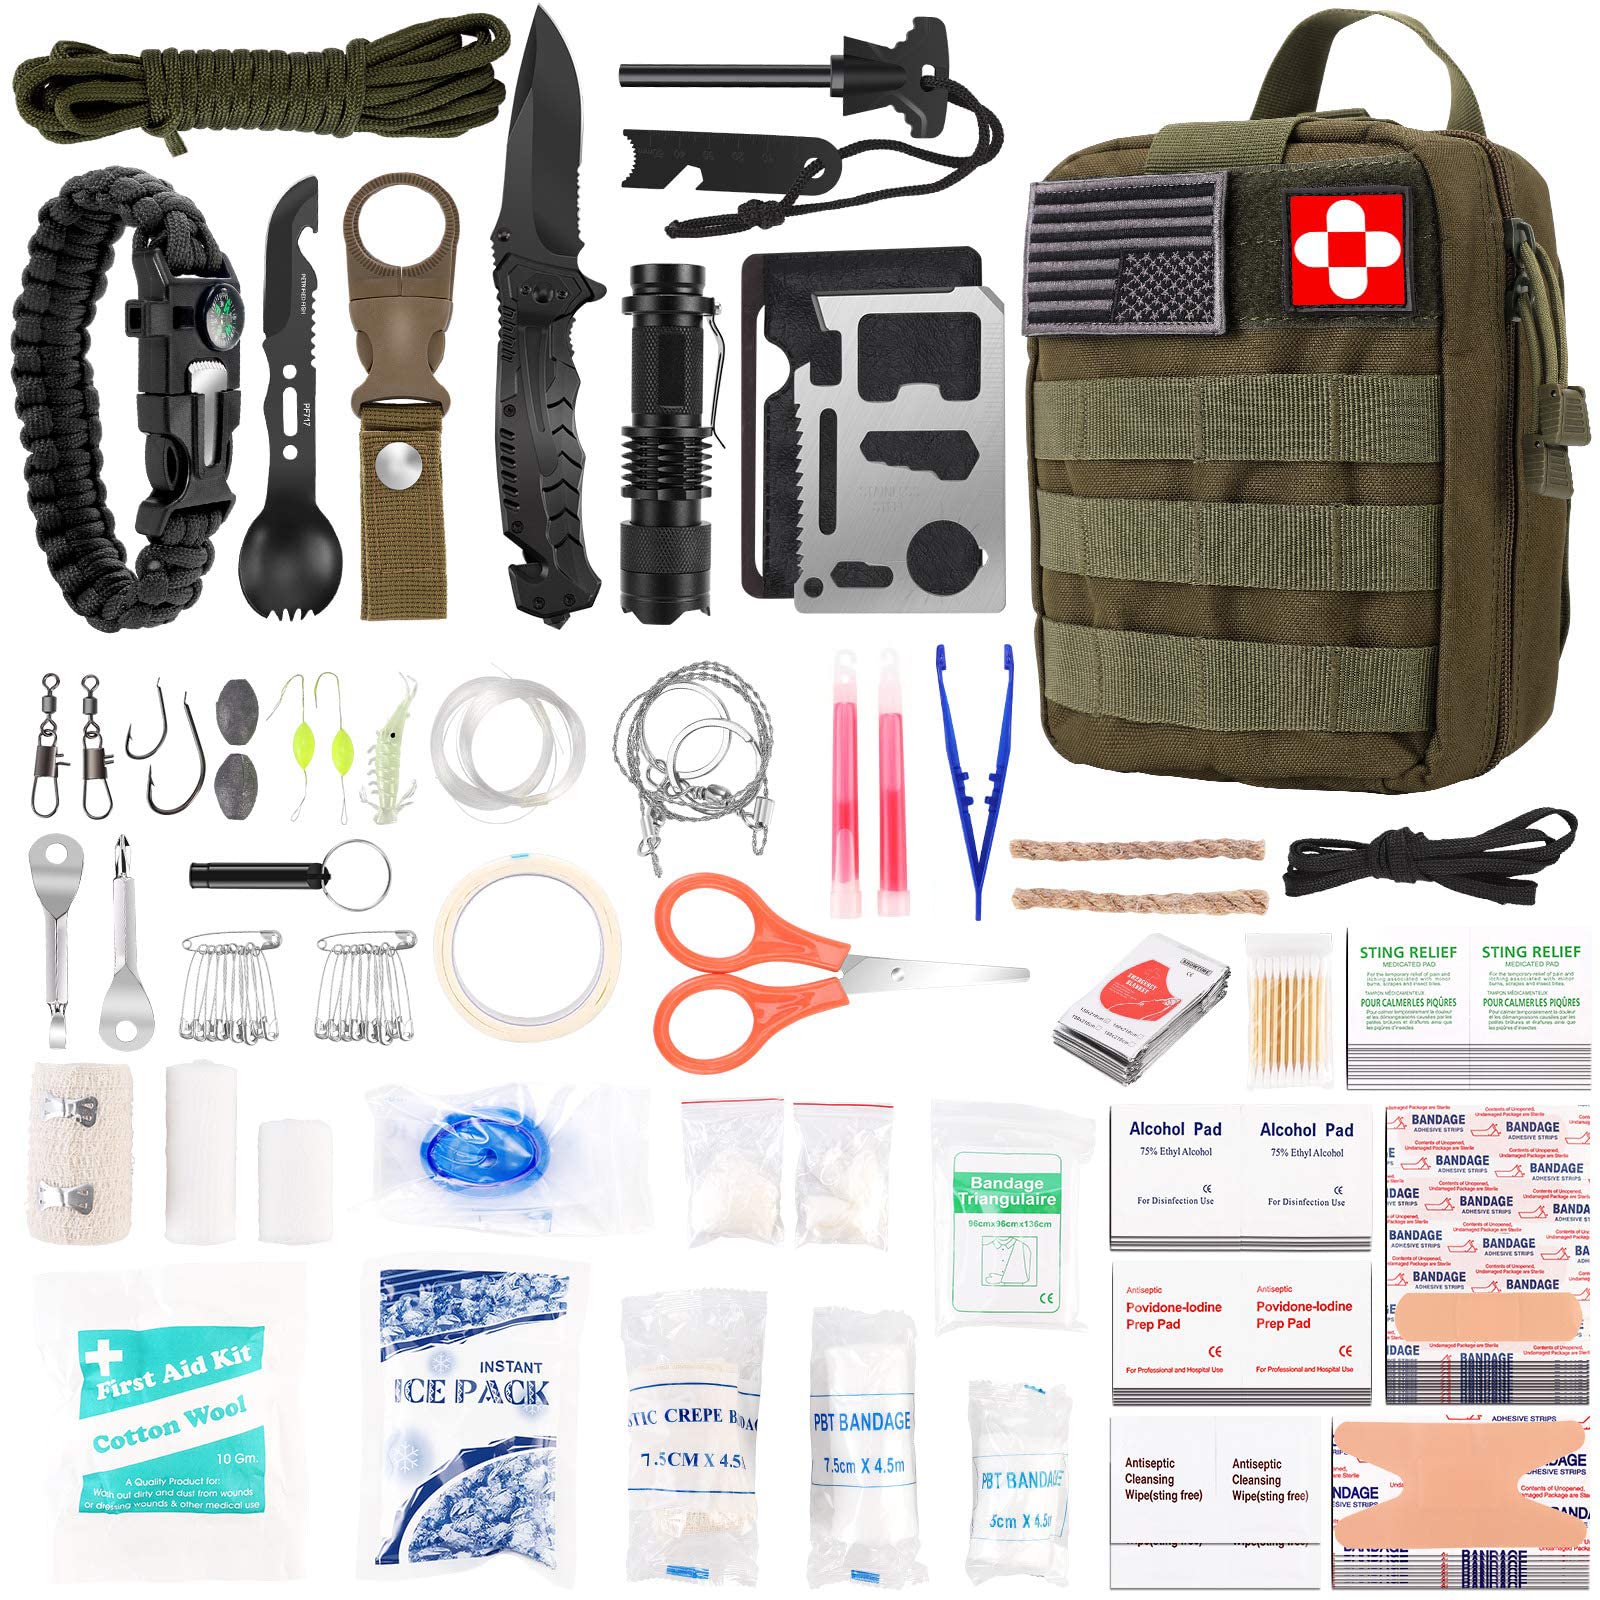 216 Pcs Survival First Aid kit, Professional Survival Gear Equipment Tools  First Aid Supplies for SOS